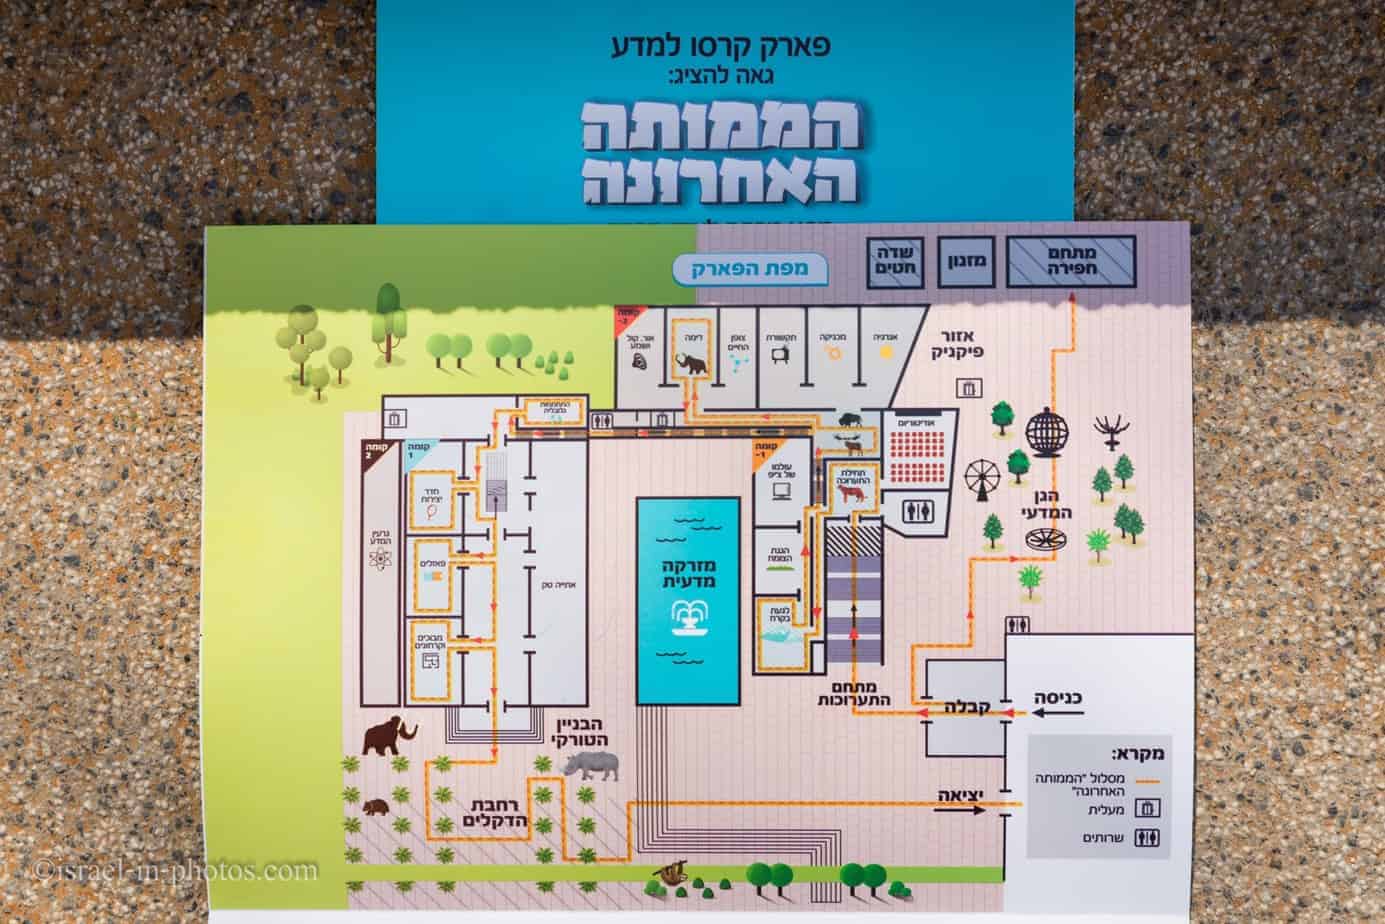 Map of Carasso Science Park, Beer Sheva